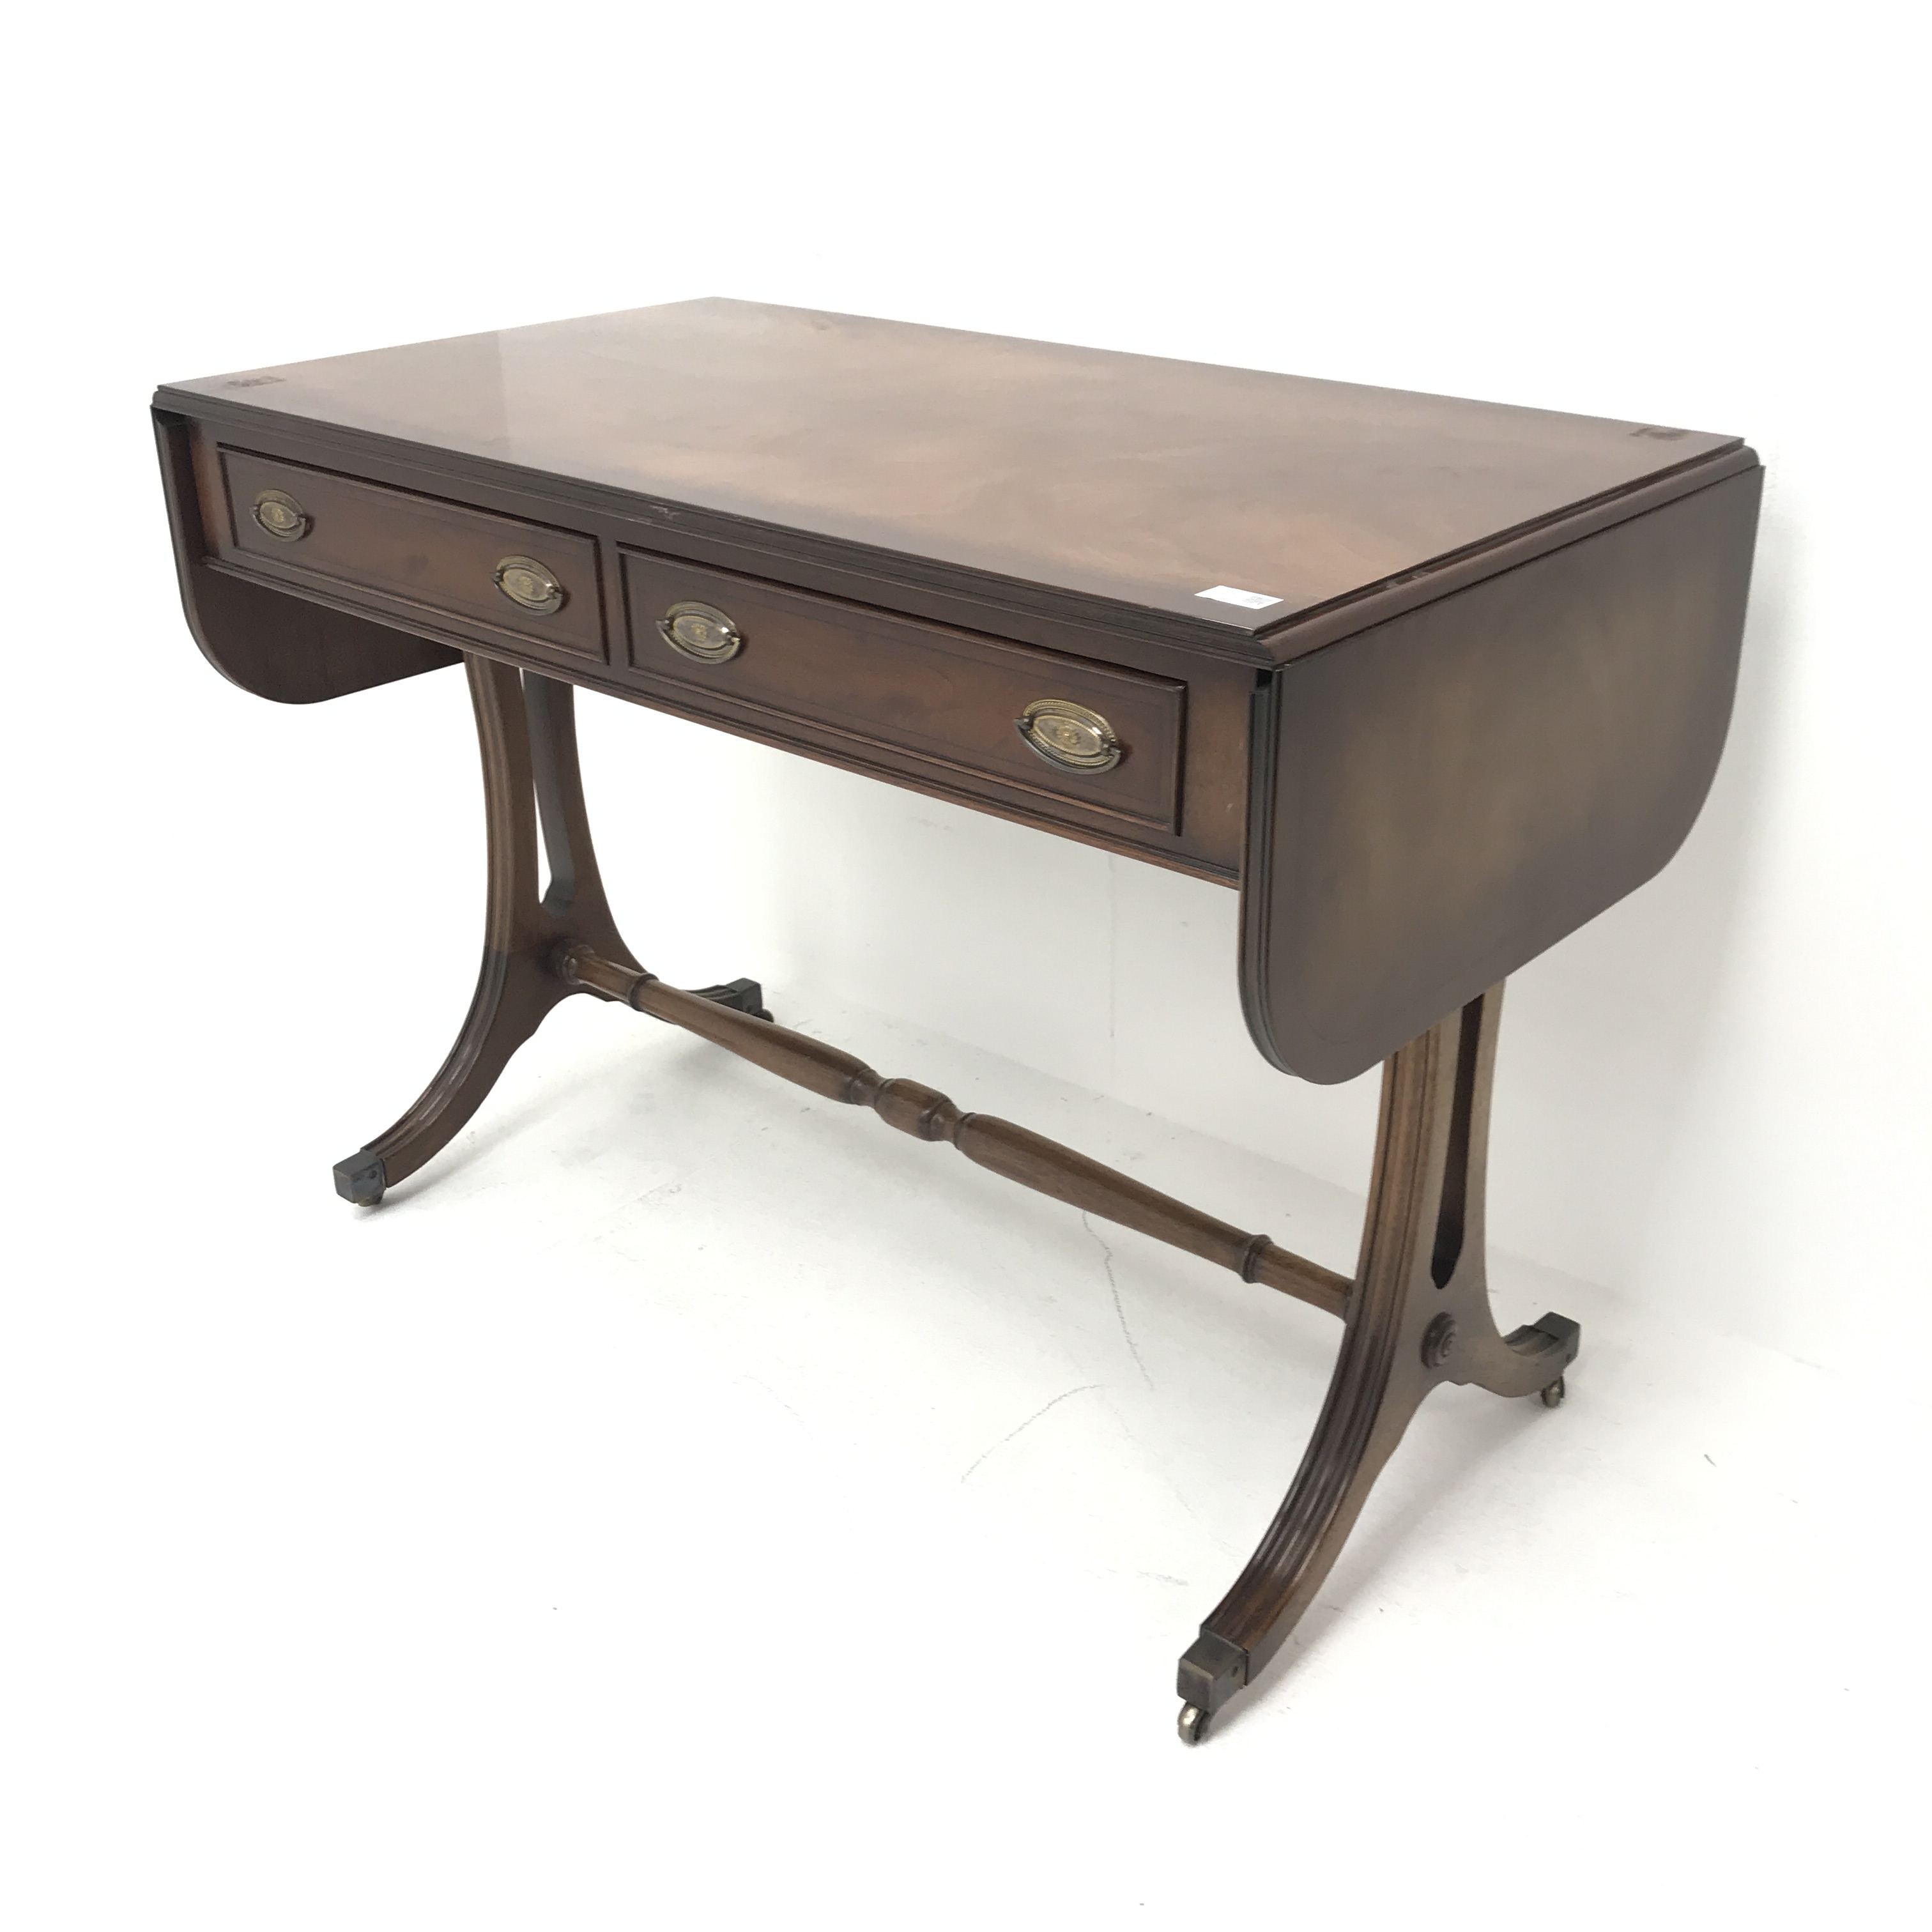 Bevan Funnell Reprodux cross banded mahogany drop leaf sofa table, two drawers,